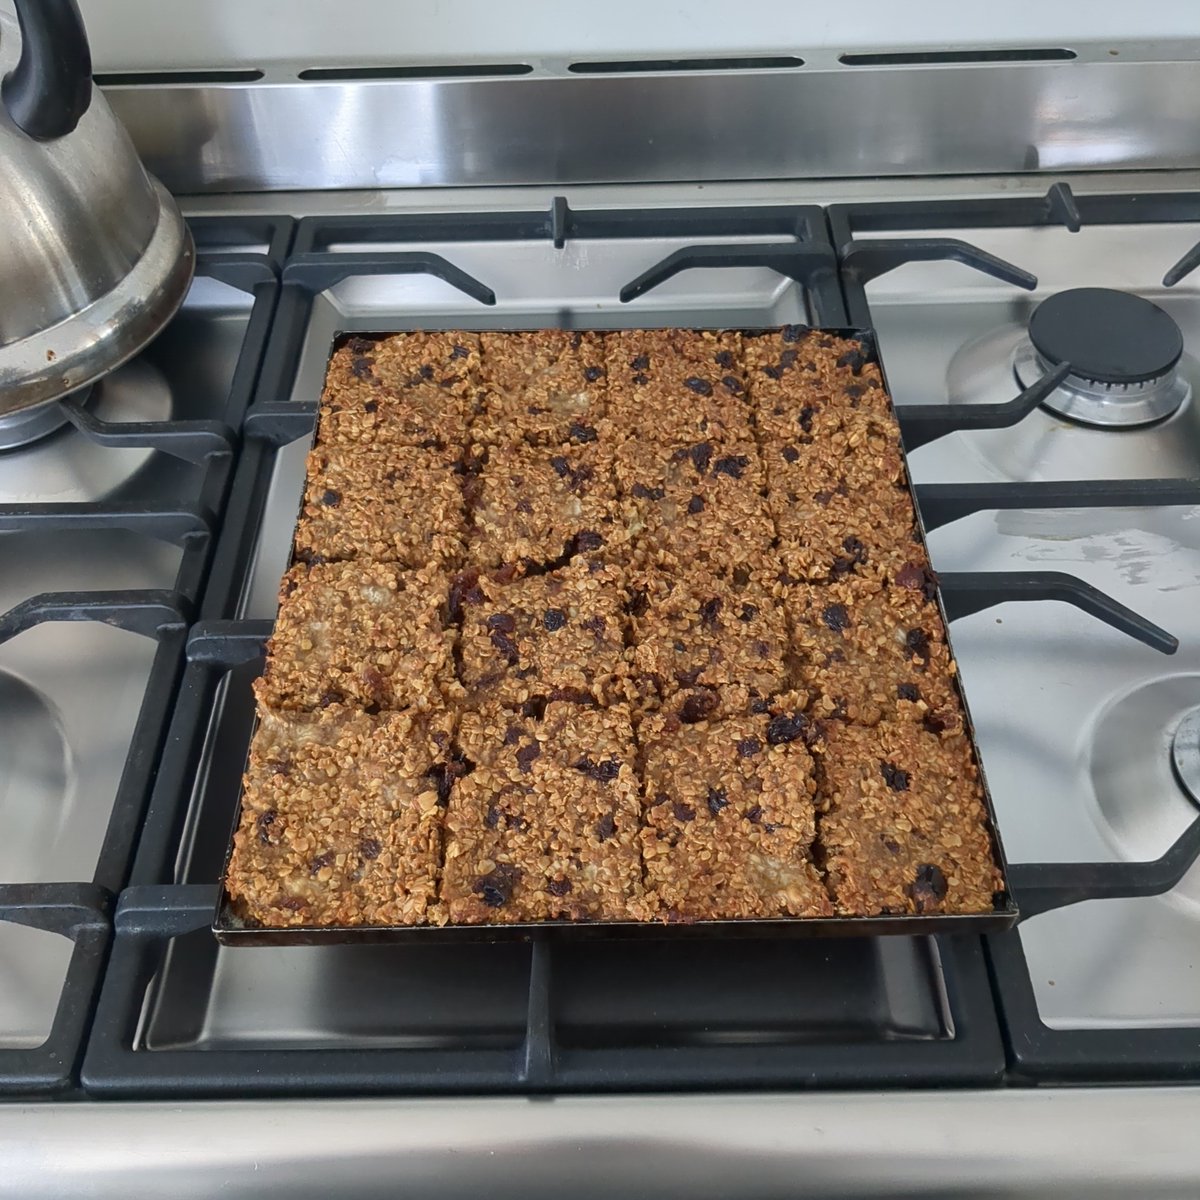 Made some banana and saltuna flapjacks ready for #wildboarchallenge Brings me back to my lockdown days that I would spend baking when I was building up my ideas for my first novel. #WritingCommunity , #baking